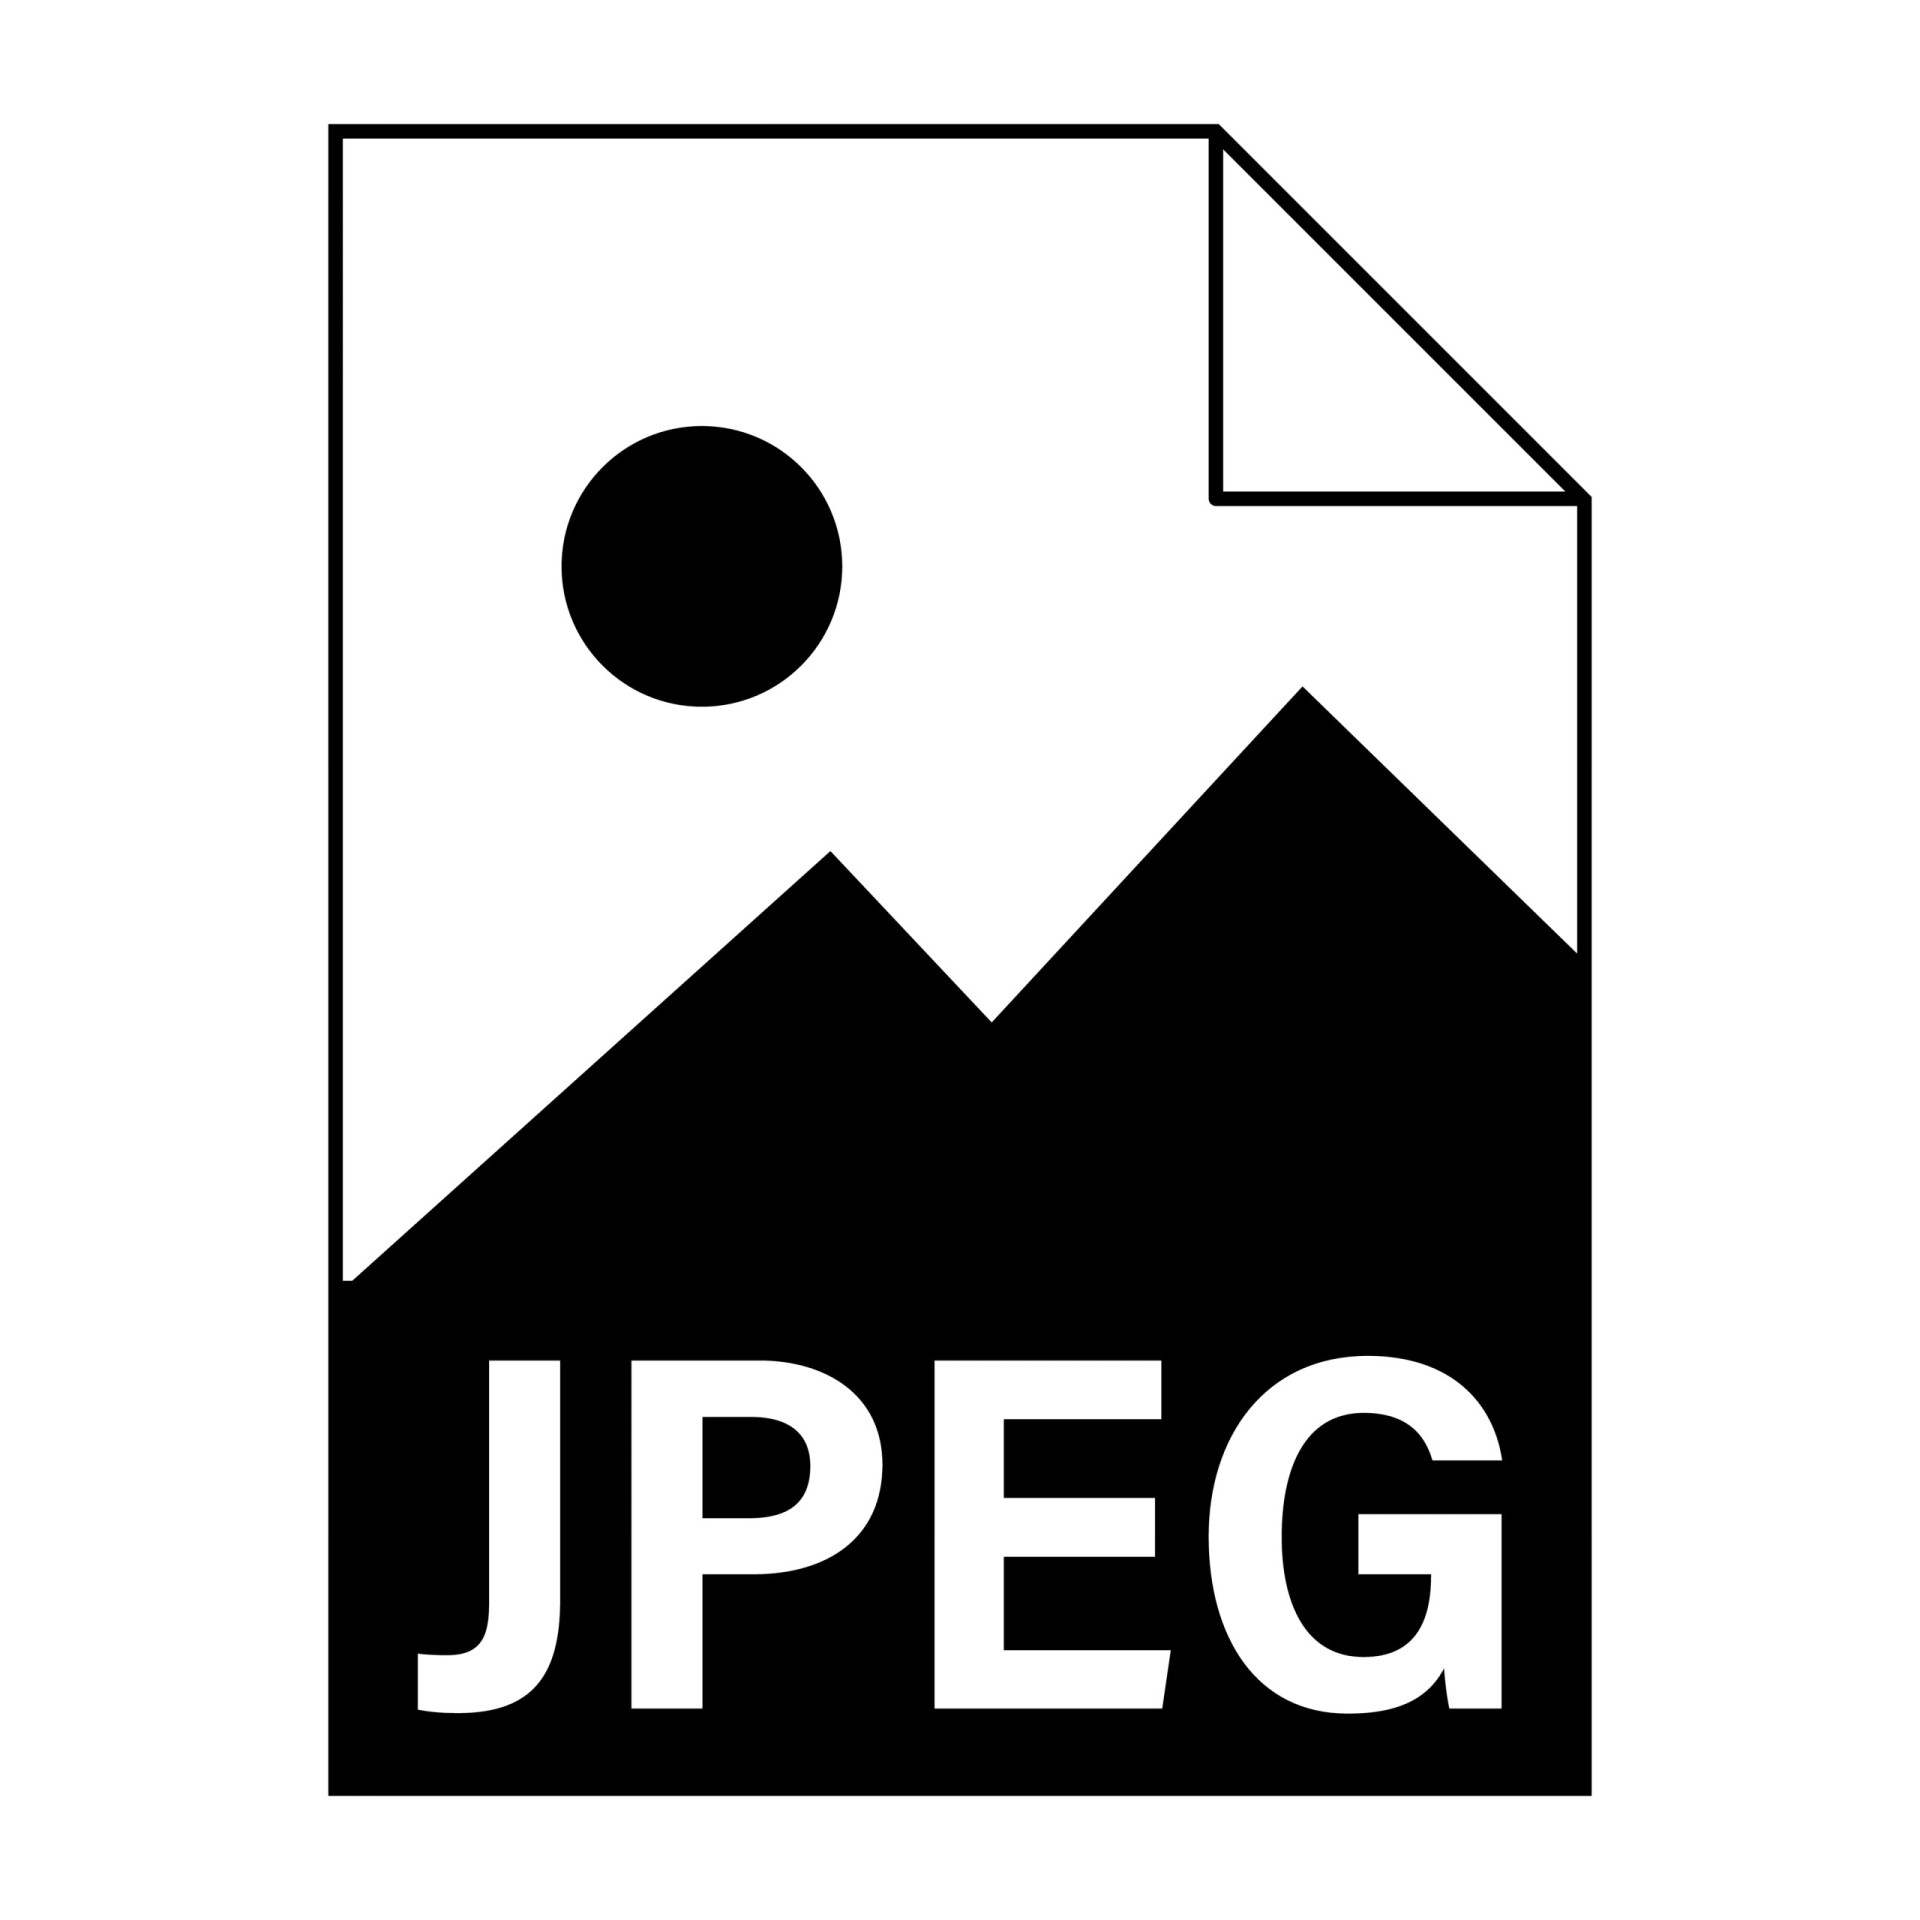 <p>People rarely, if ever, use the full name of the "joint photographic experts group," which is understandable!</p>